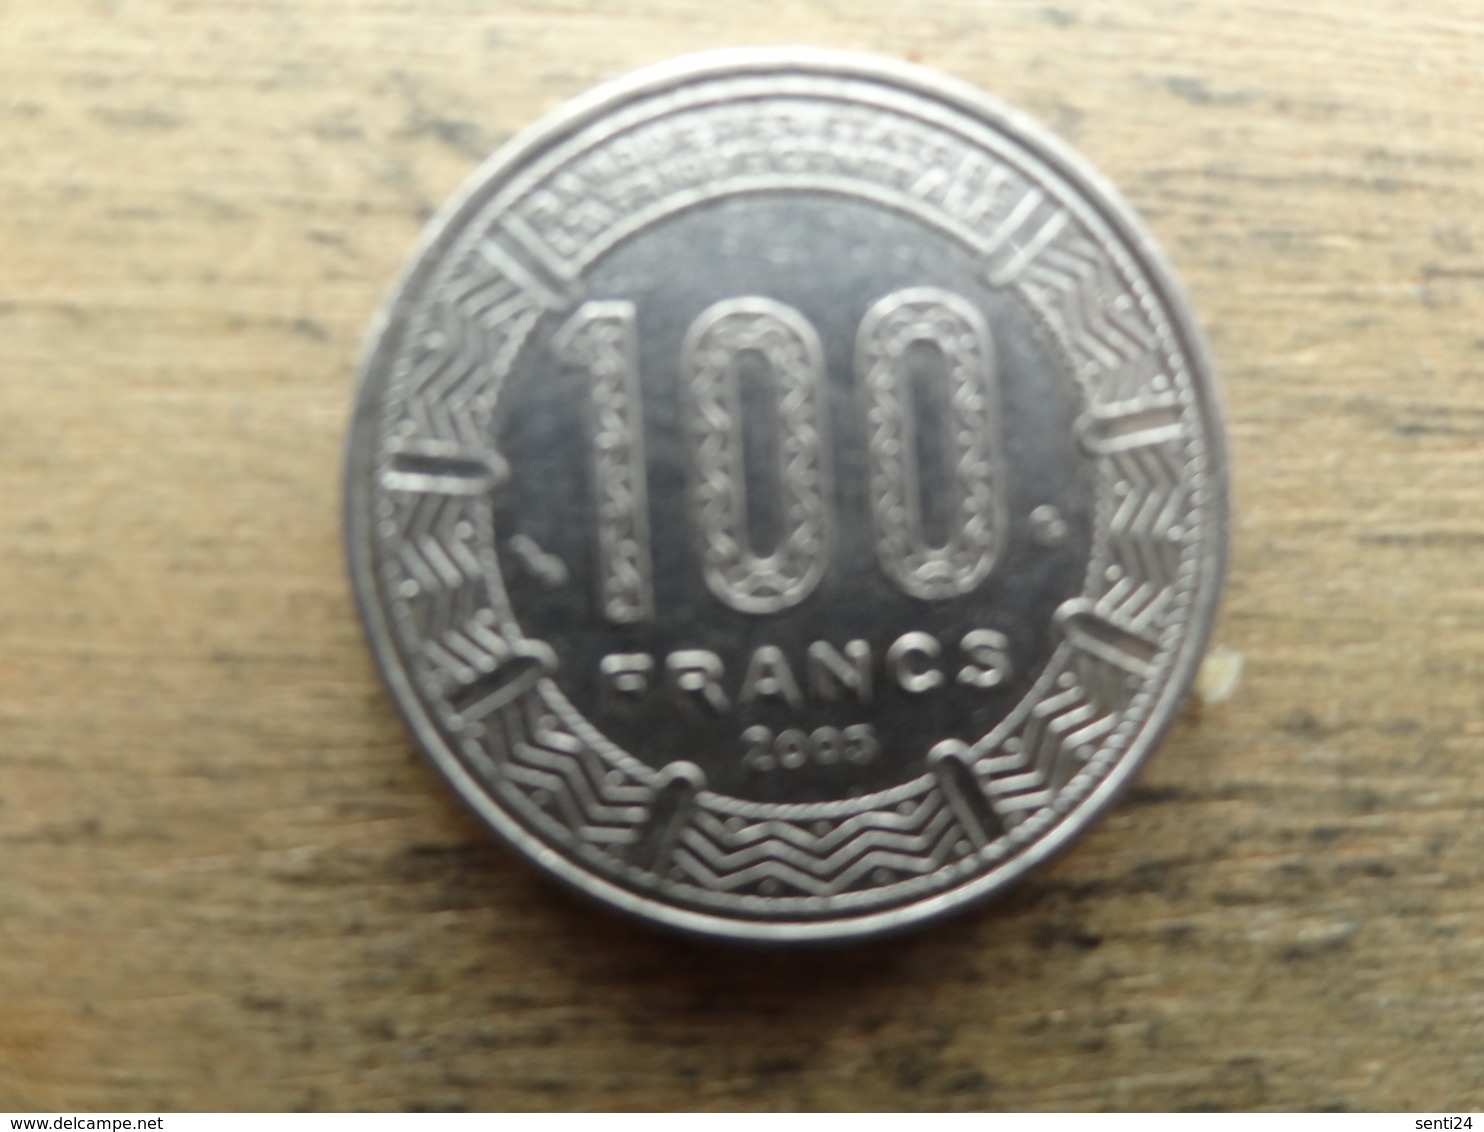 Central Africa  100  Francs  2003  Km 13 - Central African Republic